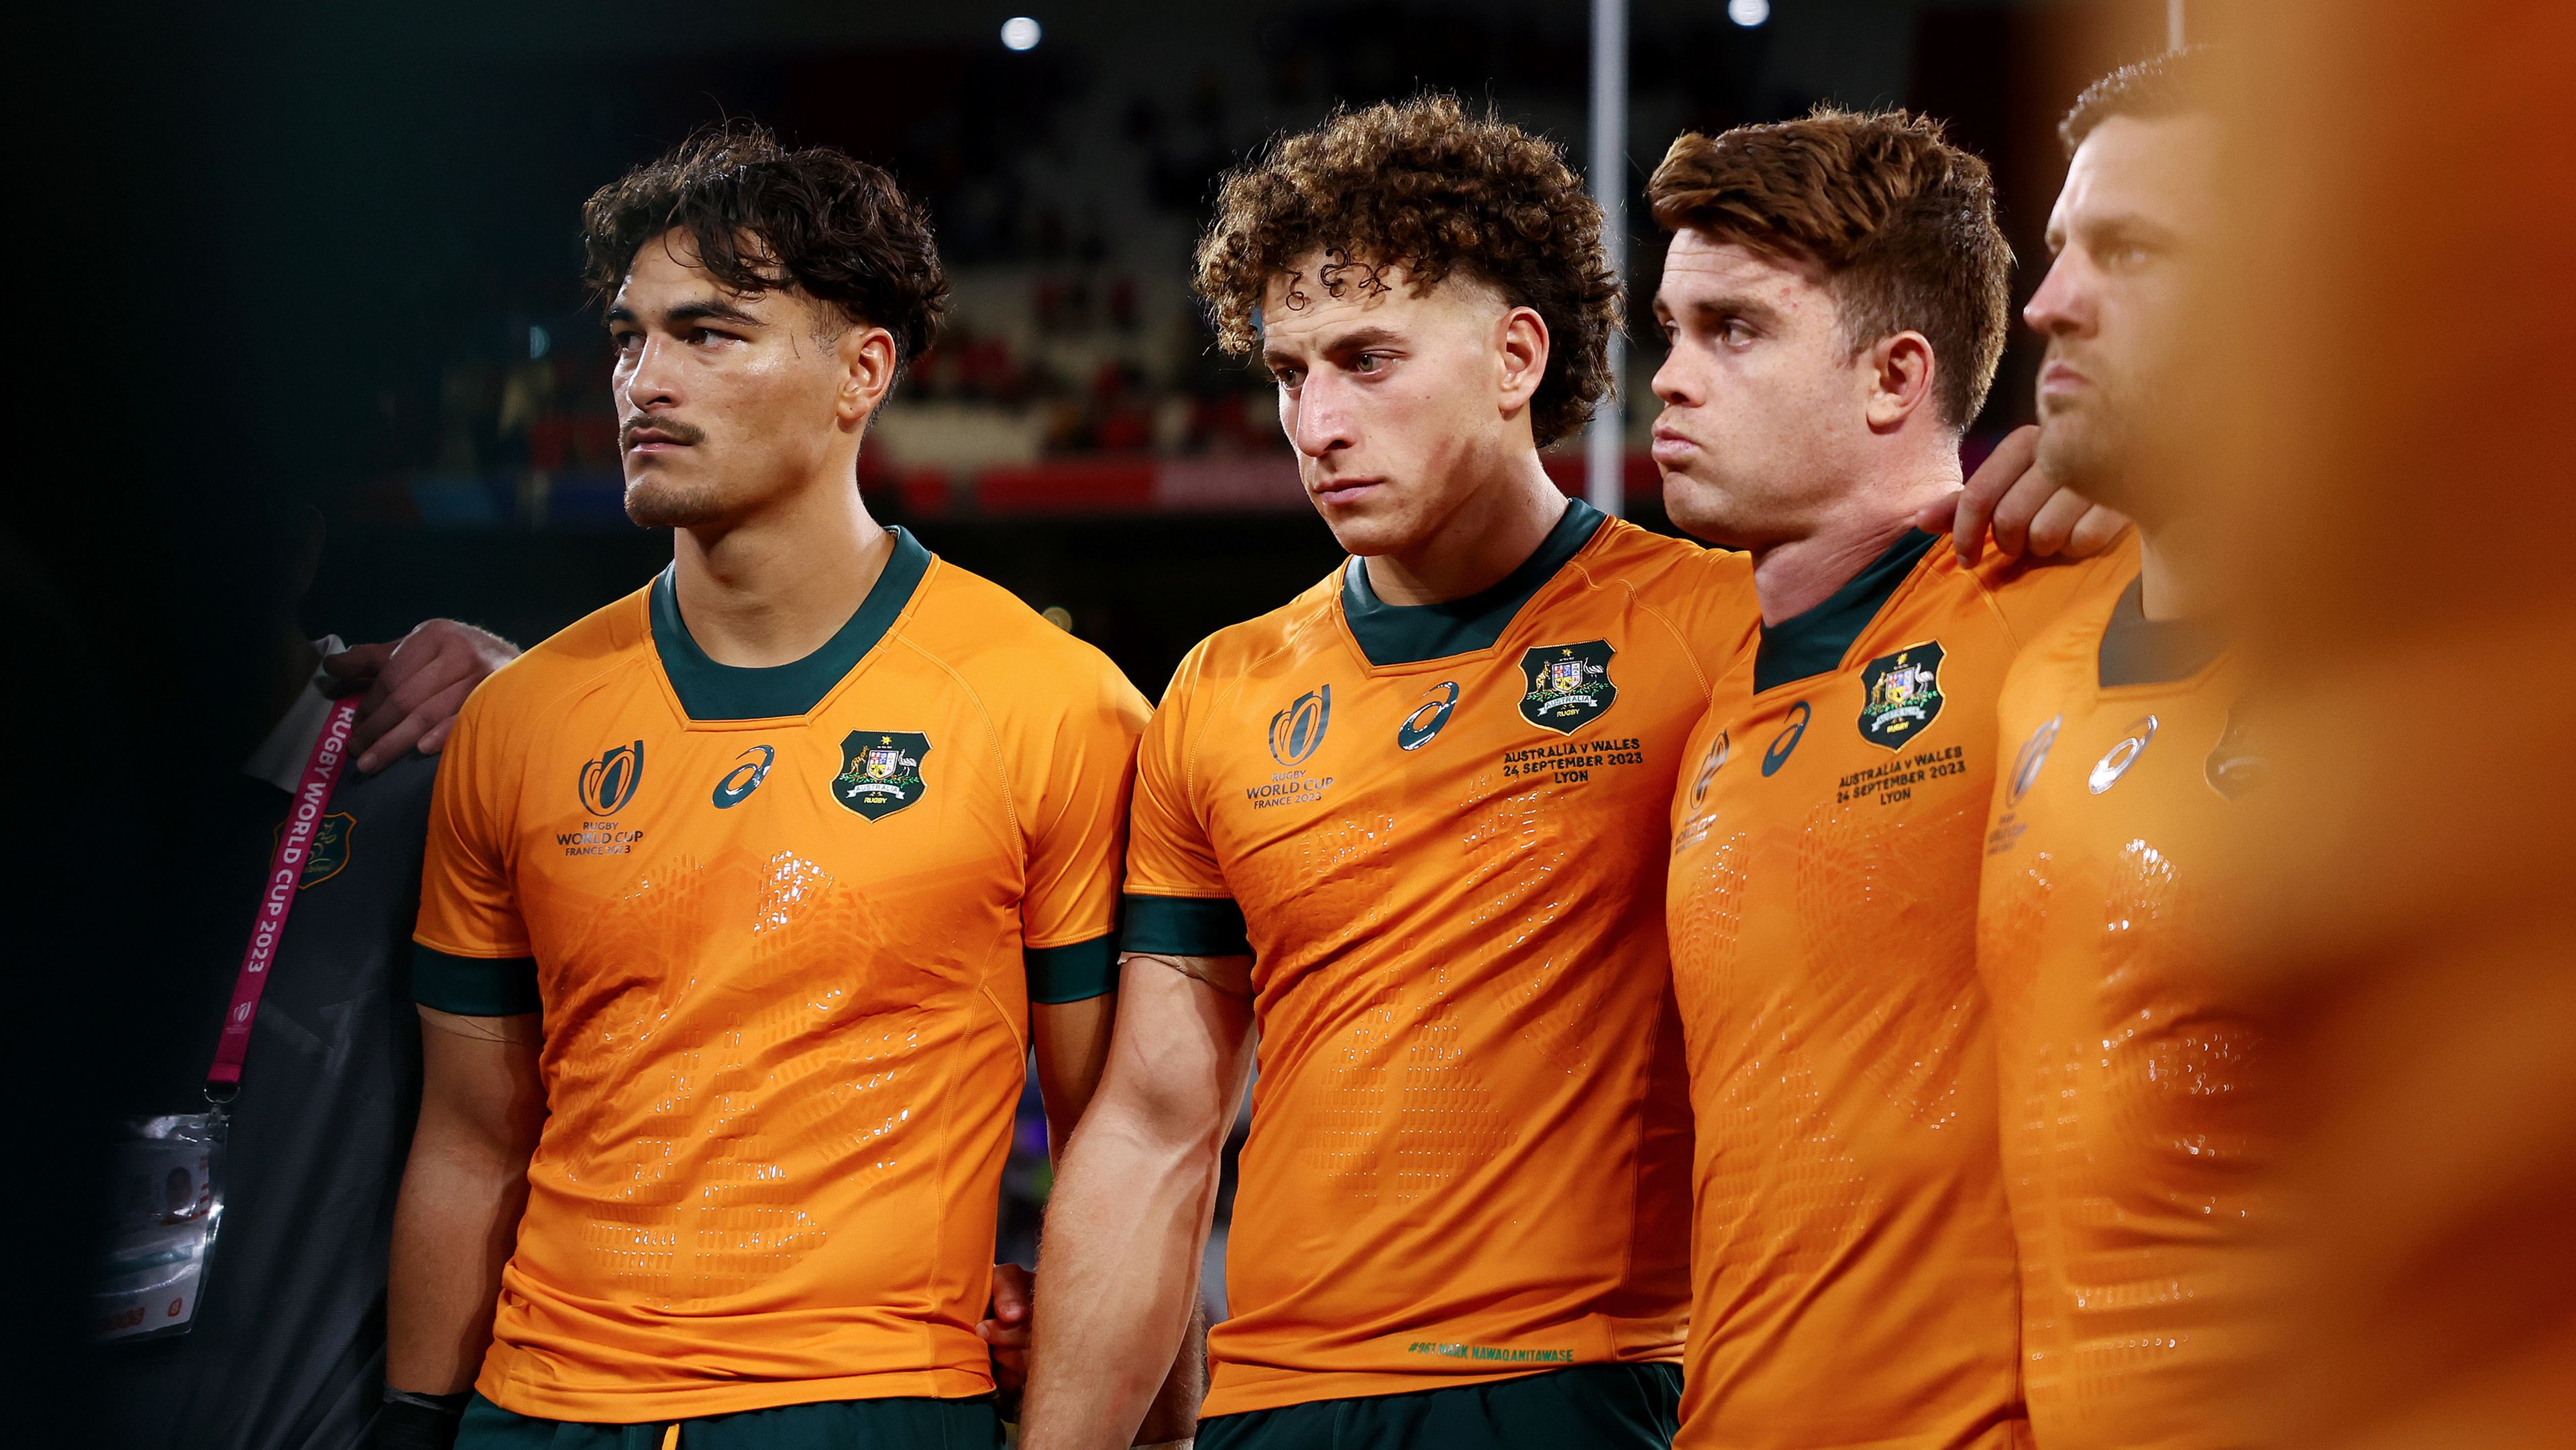 From left: Jordan Petaia, Mark Nawaqanitawase and Andrew Kellaway of Australia pictured after the Wallabies&#x27; 40-6 defeat to Wales.